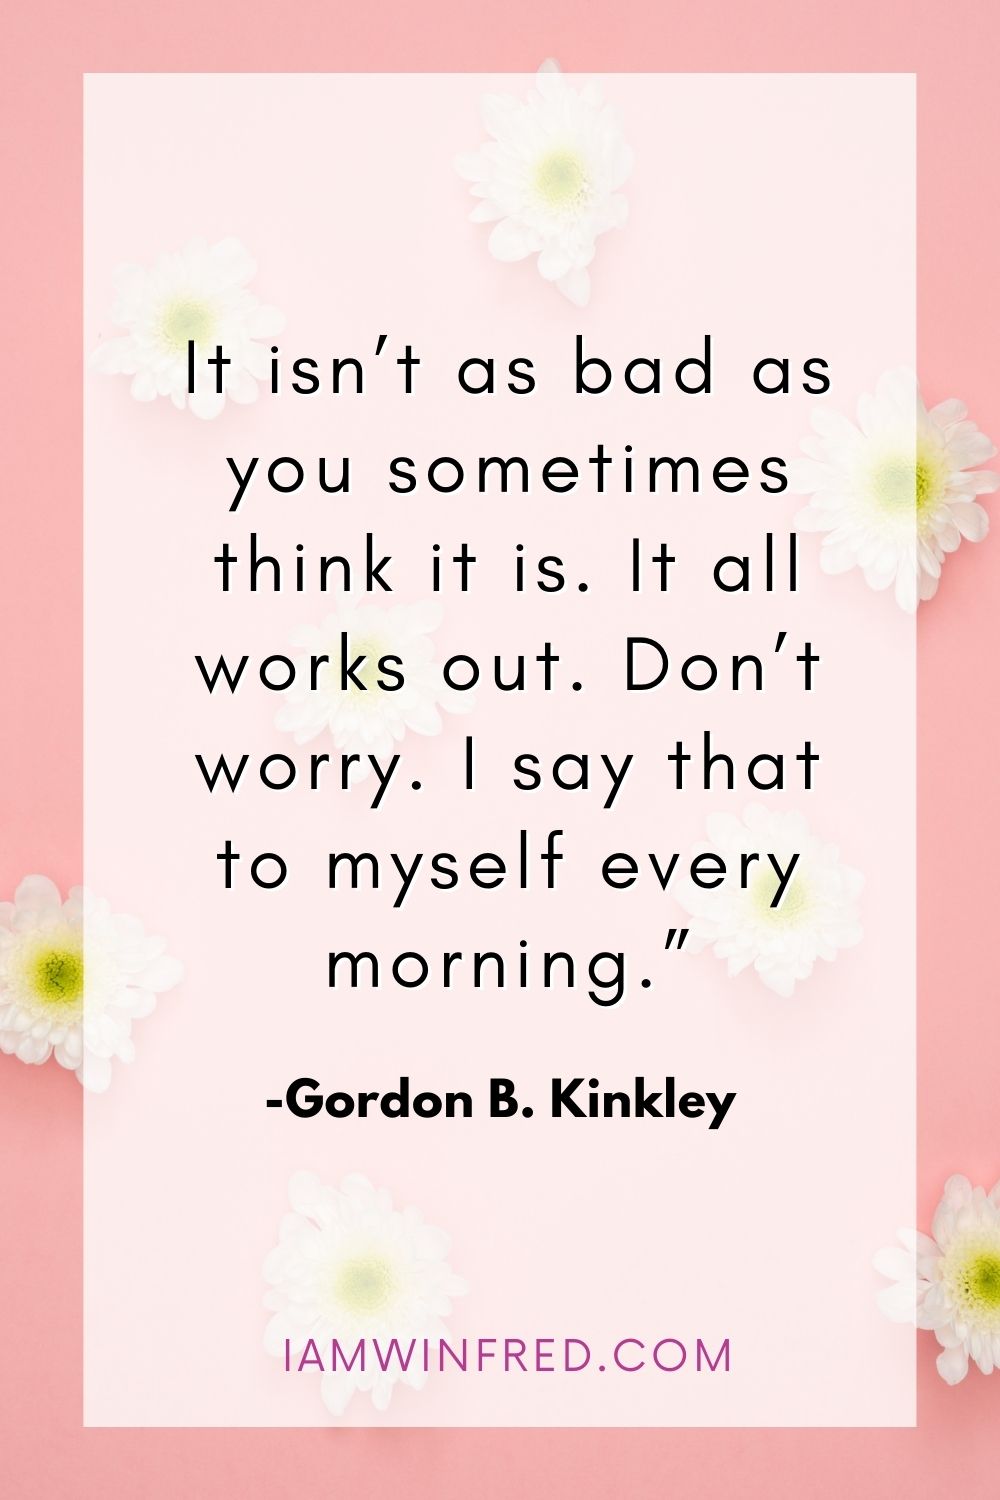 It Isnt As Bad As You Sometimes Think It Is. It All Works Out. Dont Worry. I Say That To Myself Every Morning.